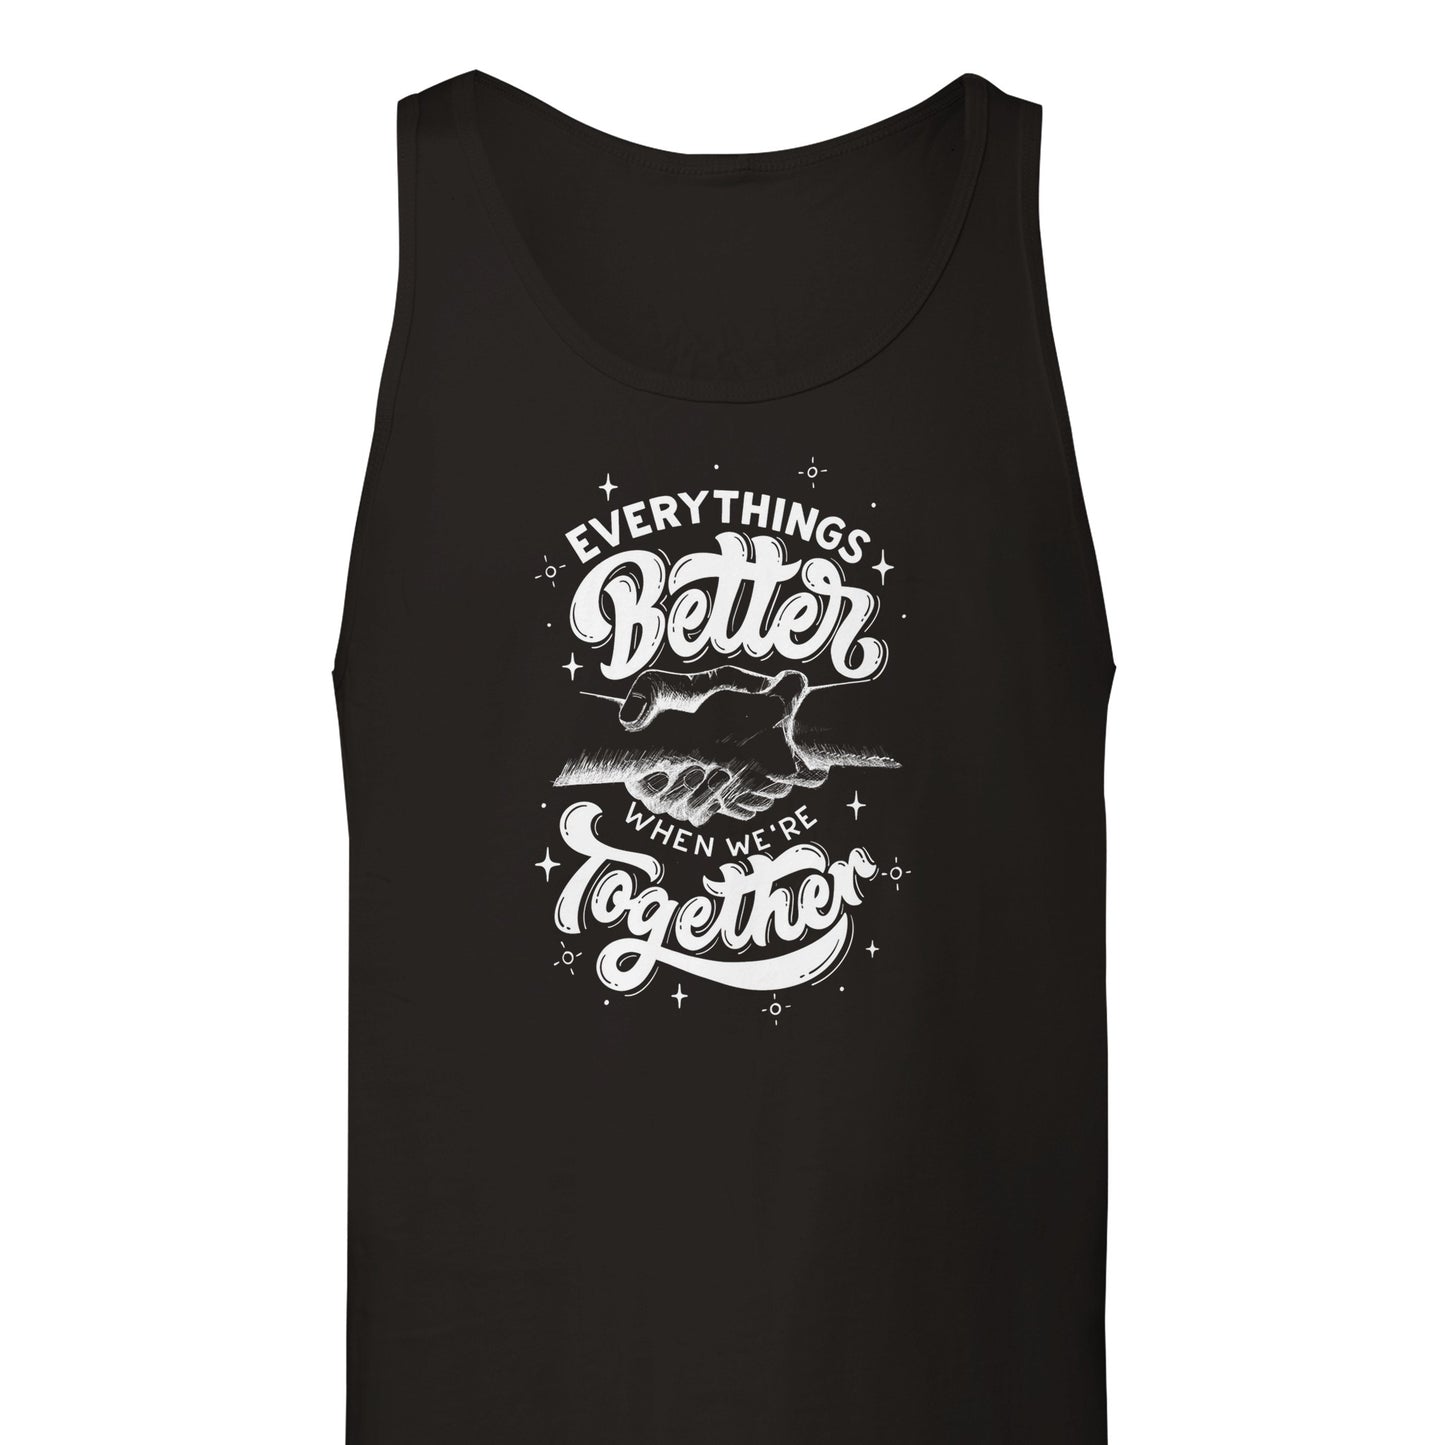 Every Thing's Better When We're Together- Inspirational Quote Premium Unisex Tank Top